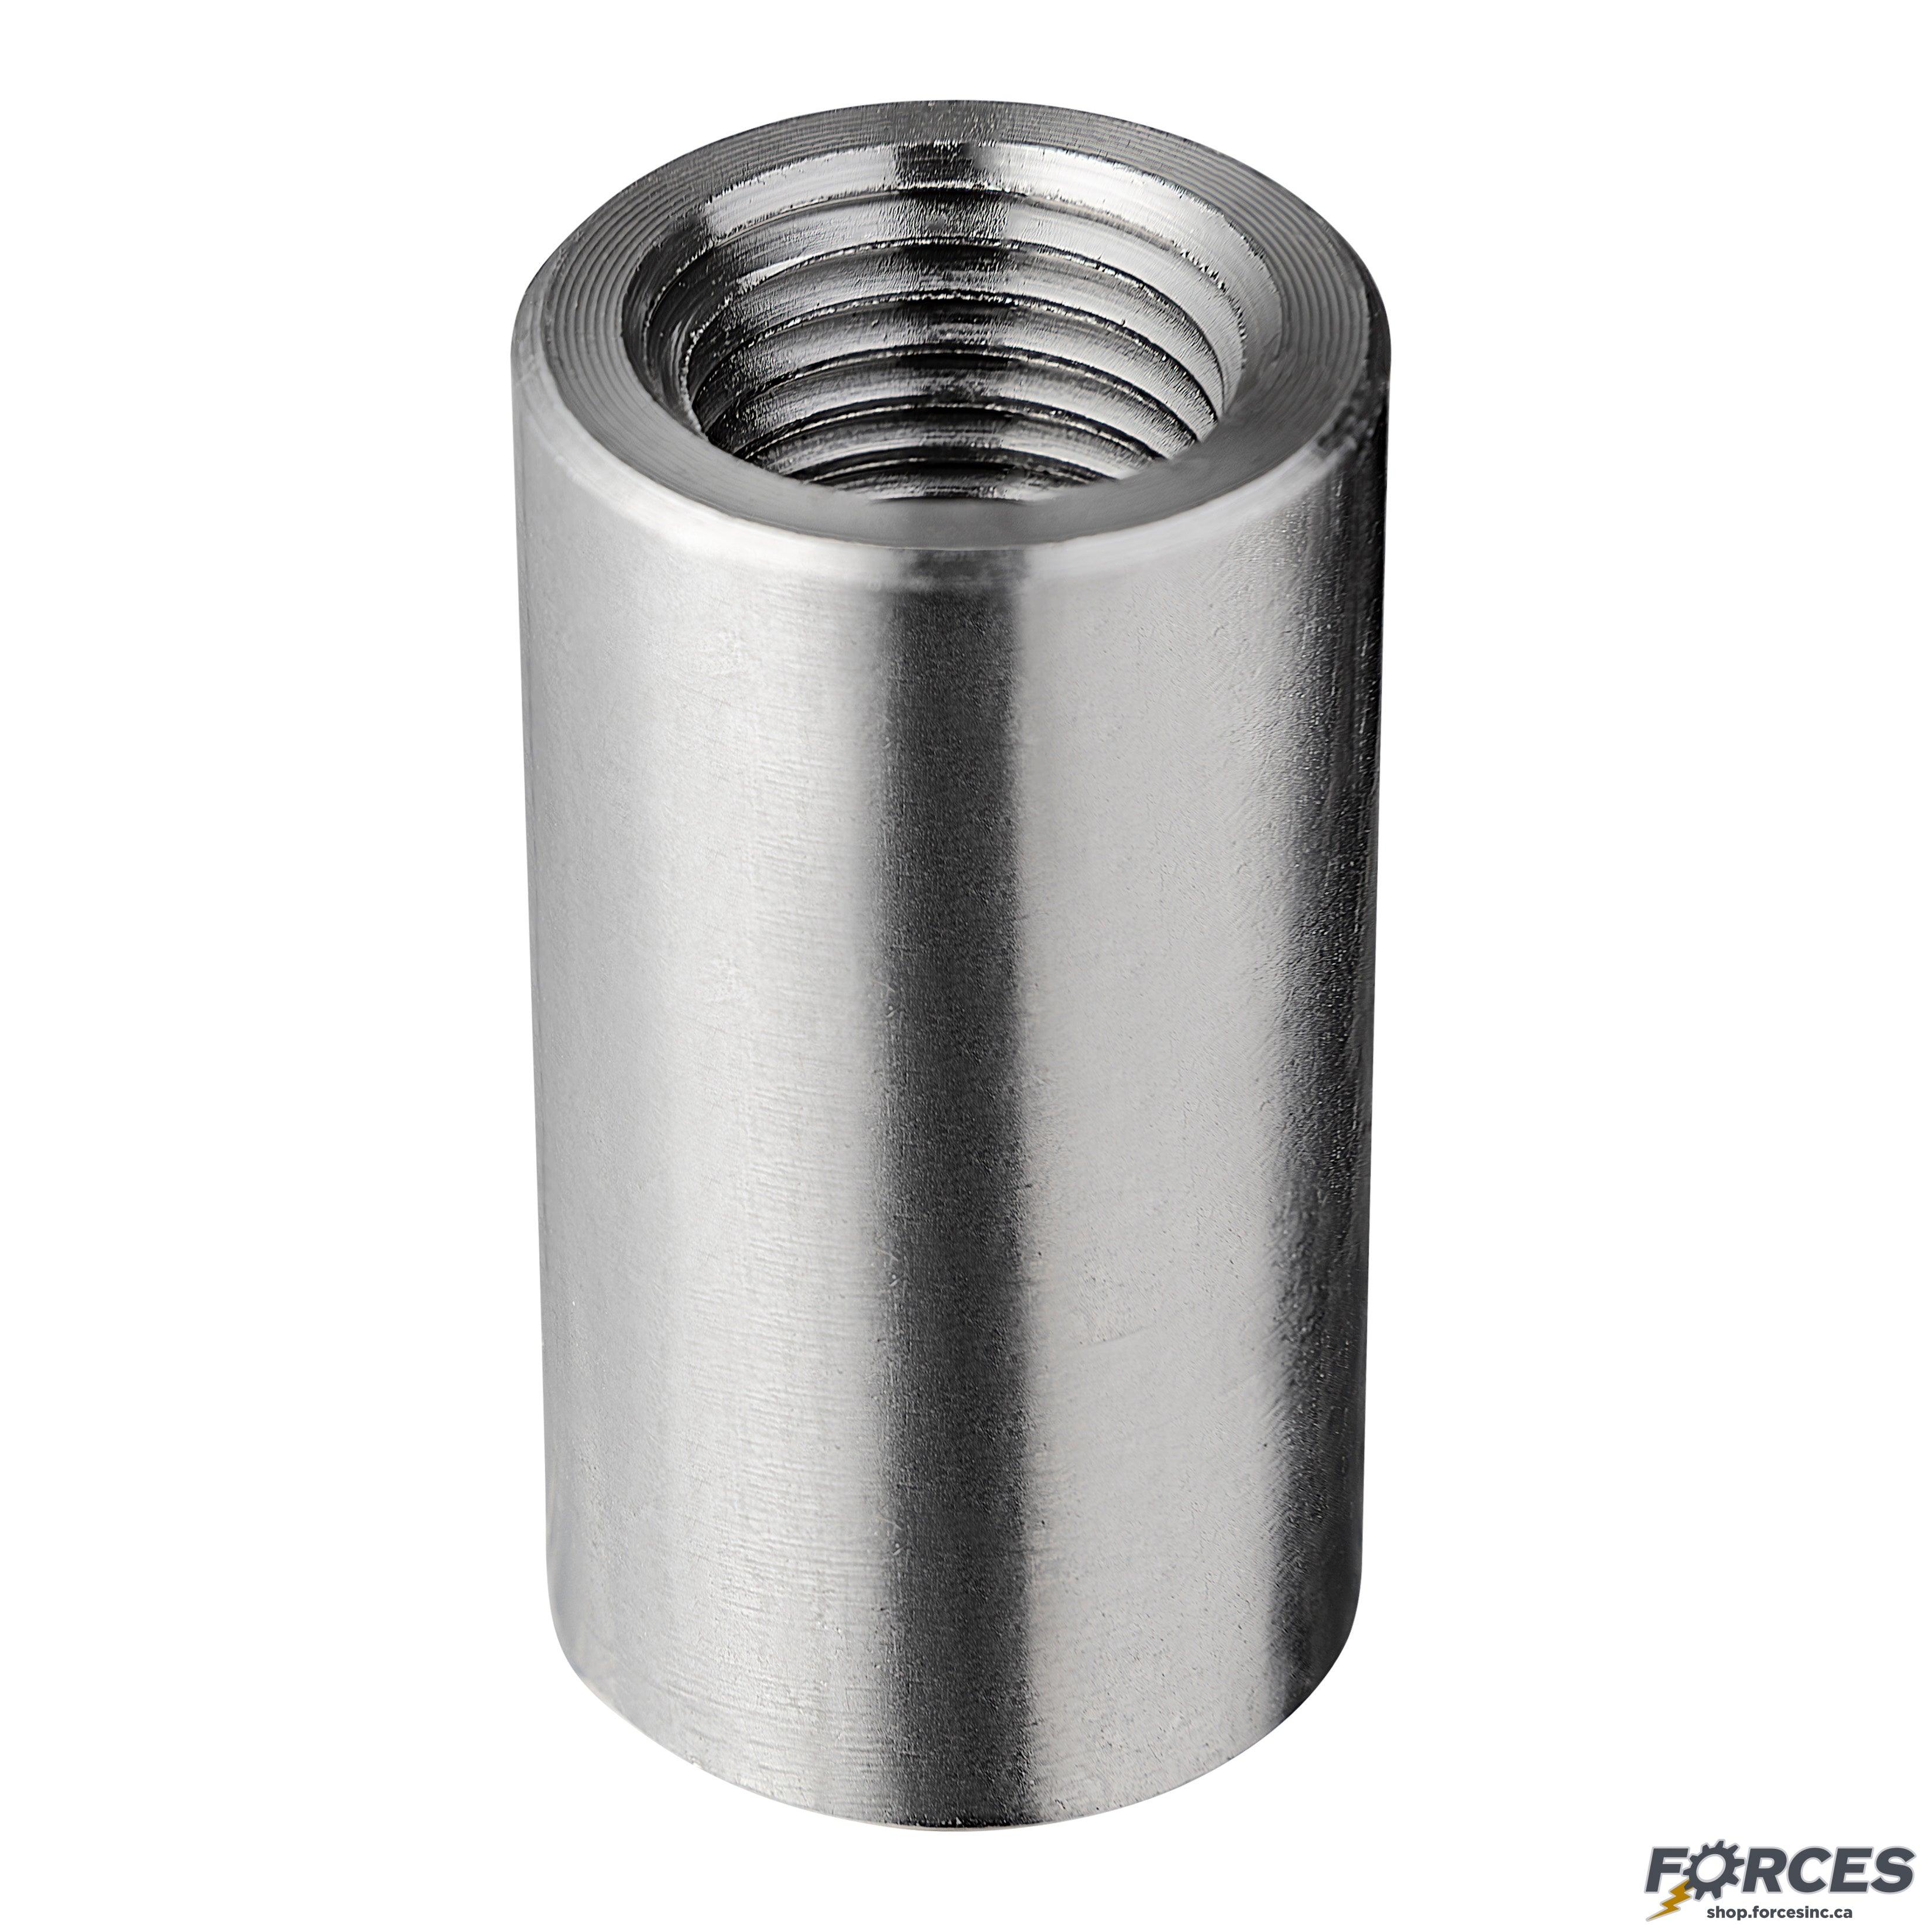 1/4" Full Coupling NPT #3000 - Stainless Steel 316 - Forces Inc